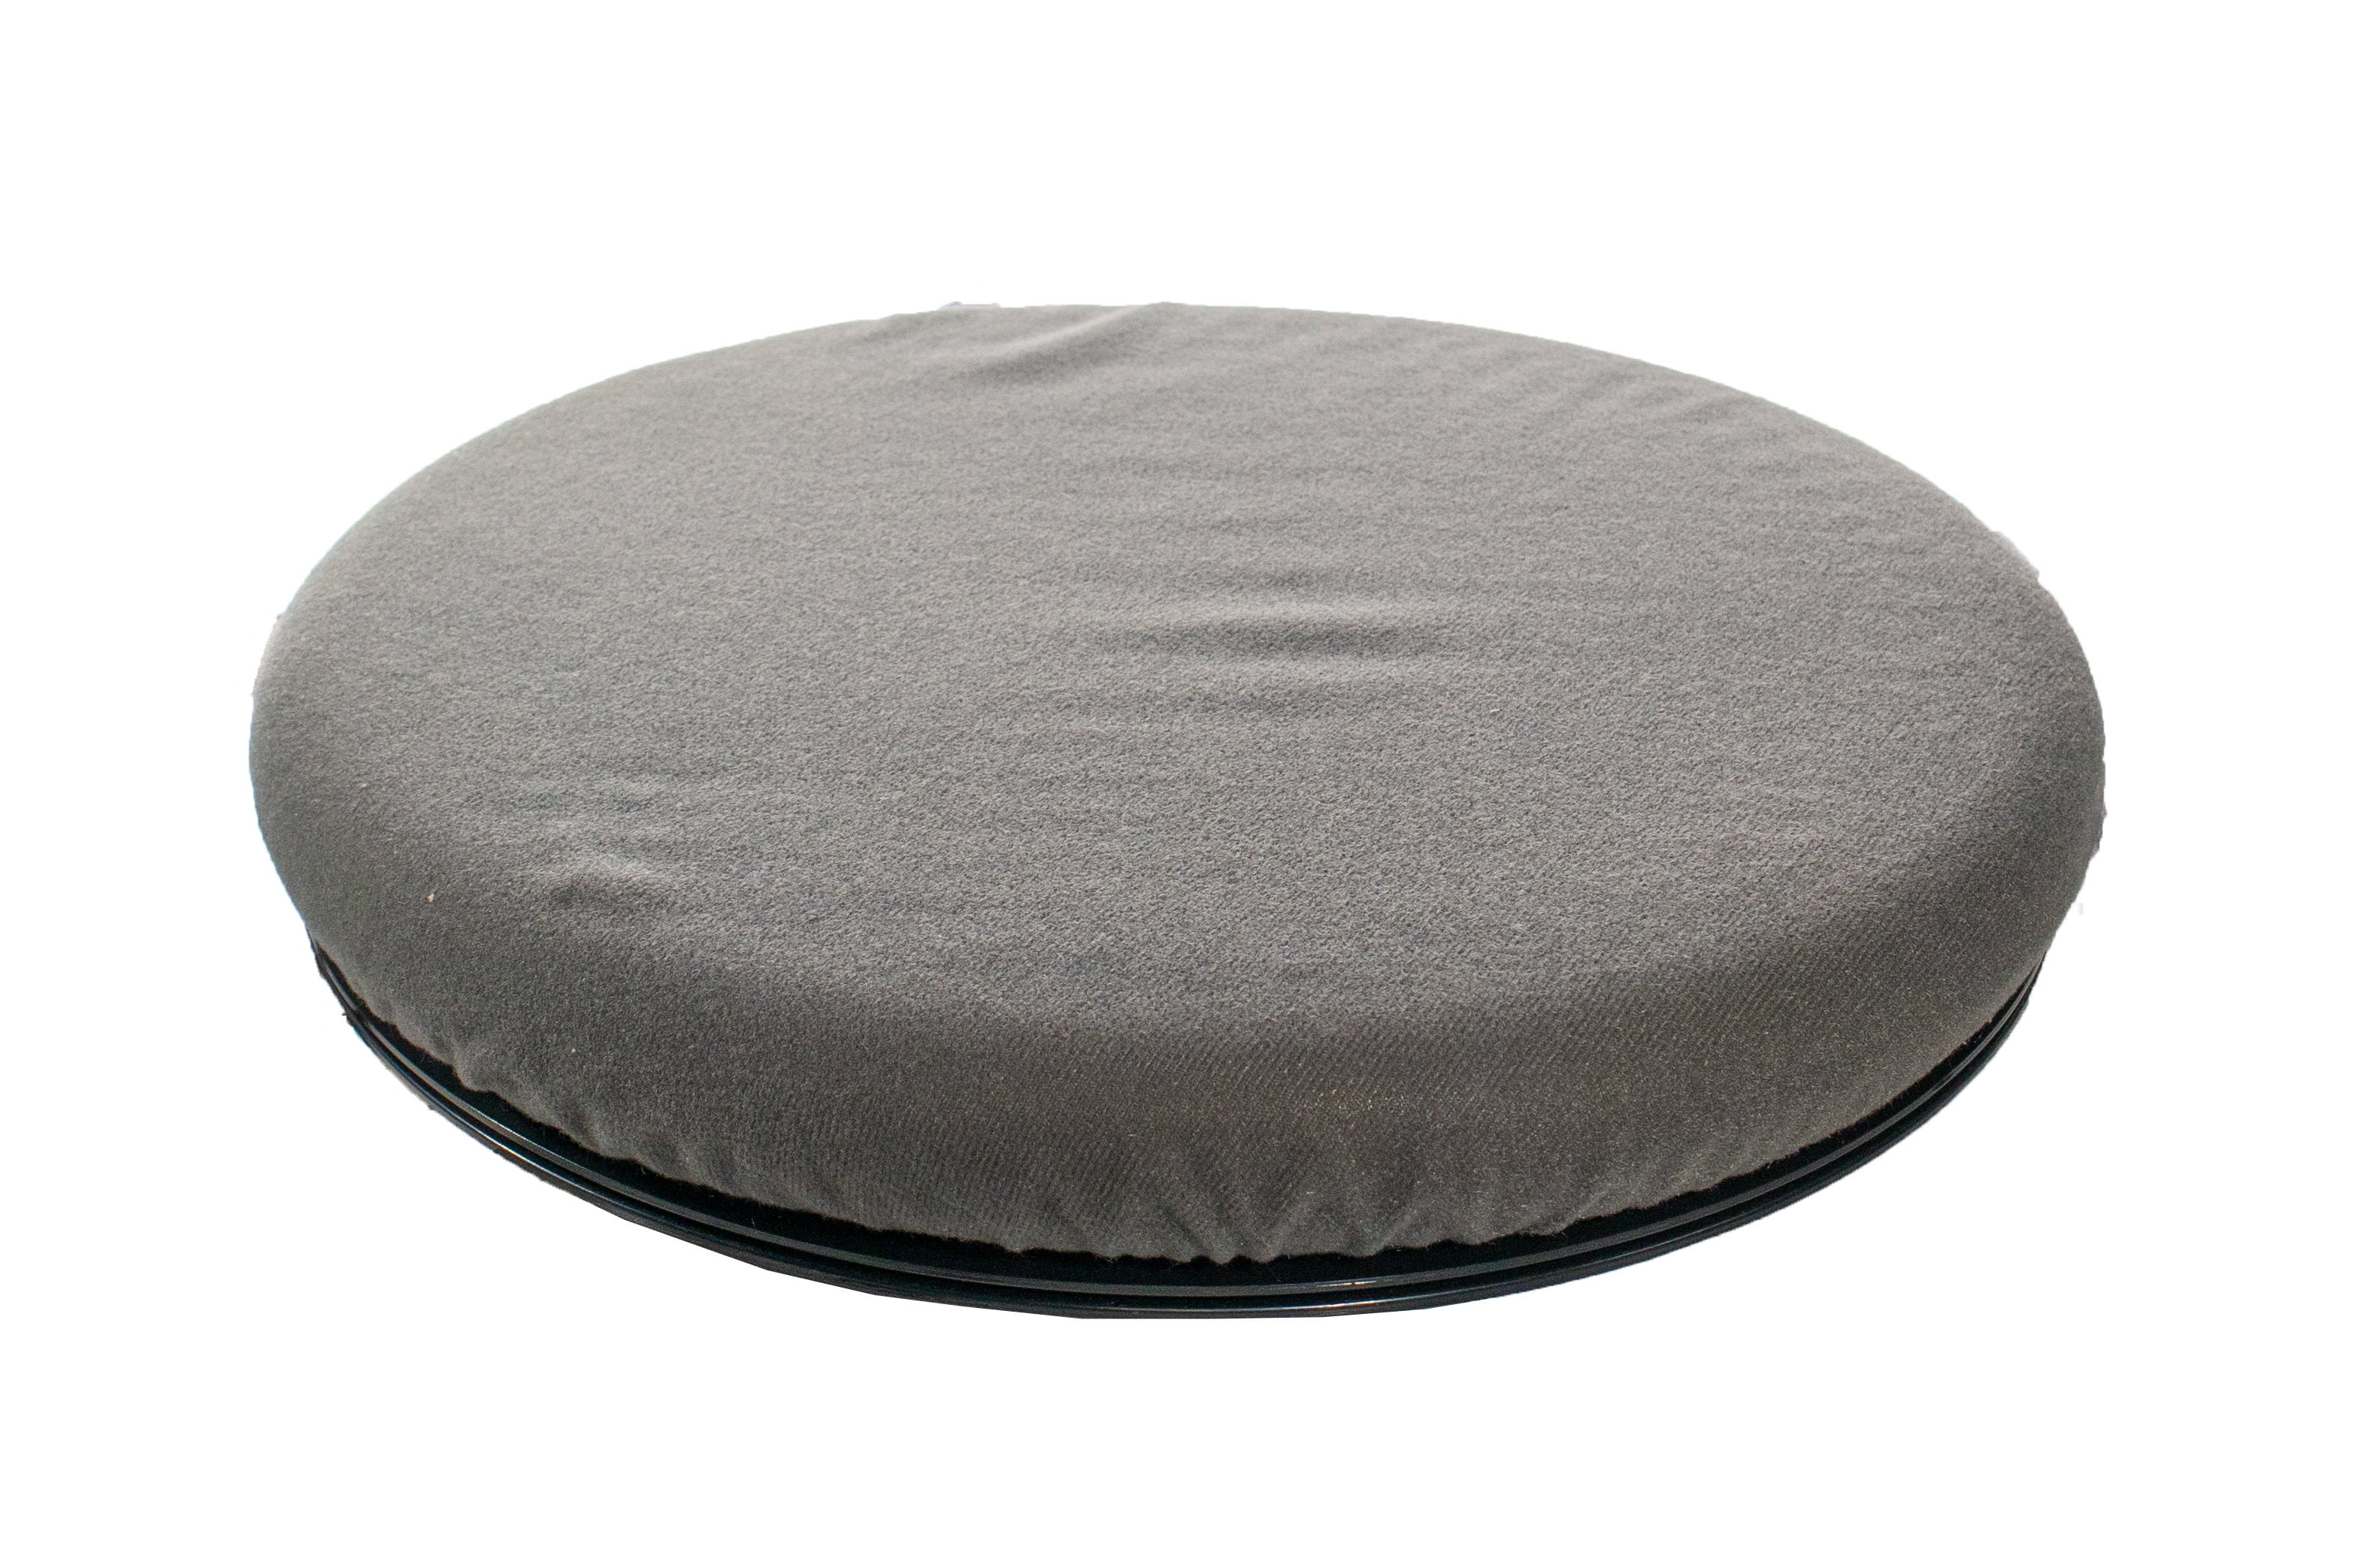  360° Rotating Seat Cushion, 360 Degree Swivel Seat Cushion for  Car, Multifunctional Memory Foam Chair Car Cushion, Rotating Car Seat  Cushion for Elderly or Those with Limited Mobility (Beige) : Office Products